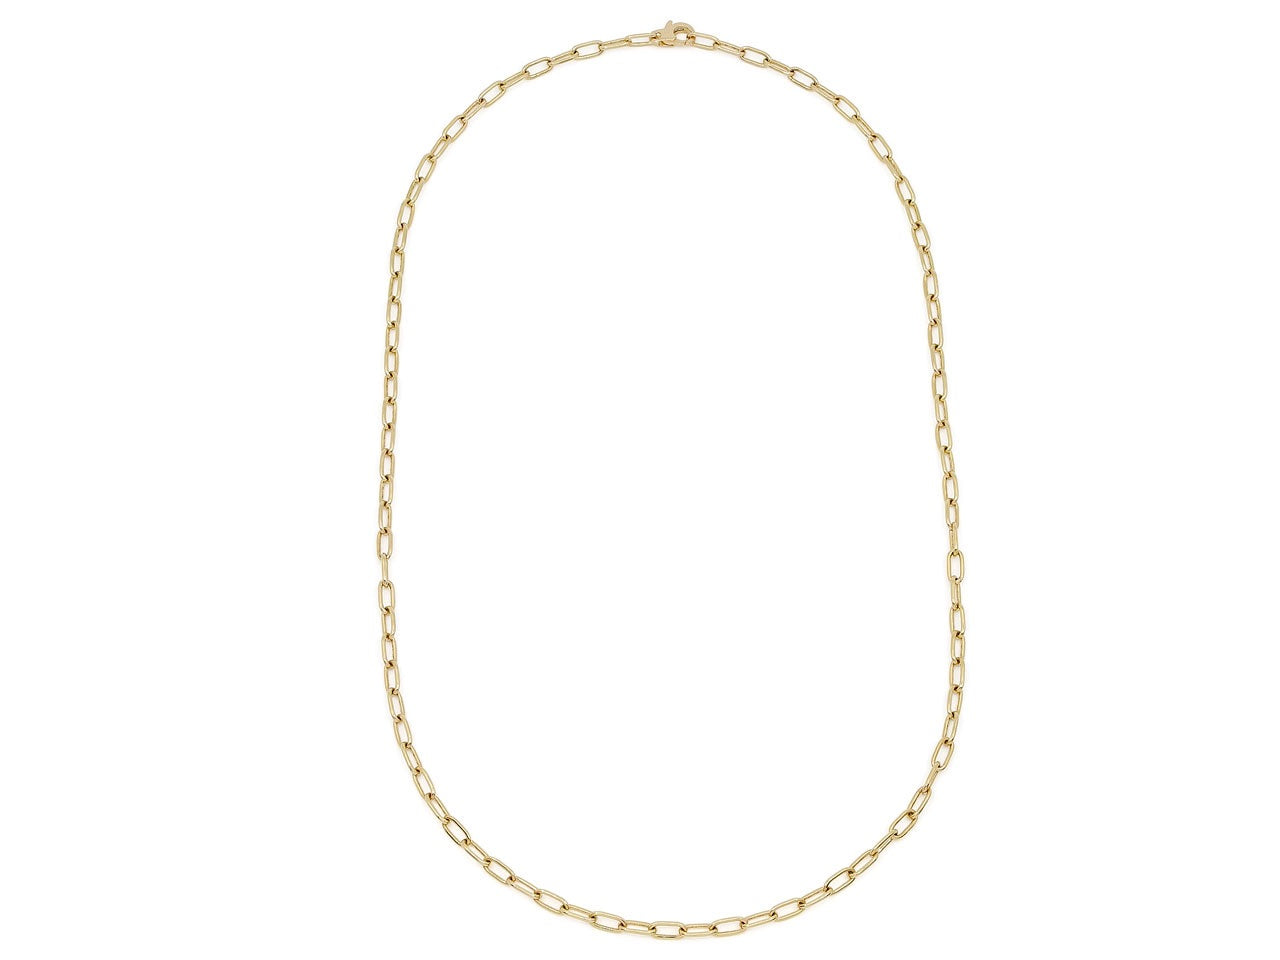 Italian Cable Link Chain in 18K Gold, by Beladora, 22 Inches